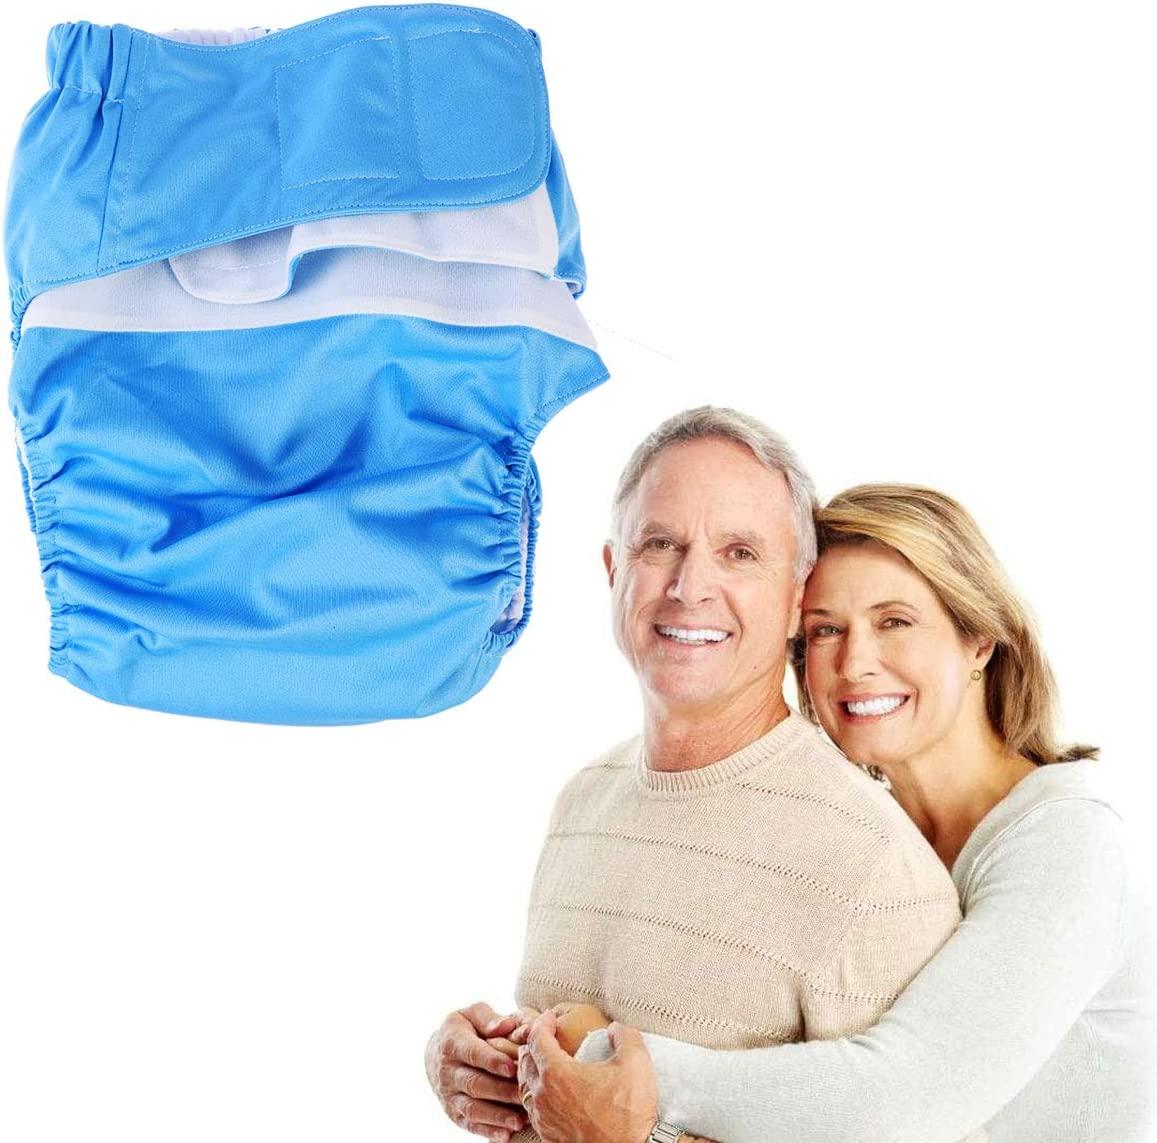 Cloth Diaper Wraps: Adult Cloth Diaper Adult Nappy Reusable Washable  Elderly Incontinence Care Protection Nappies Underwear for Elderly Patients  Men